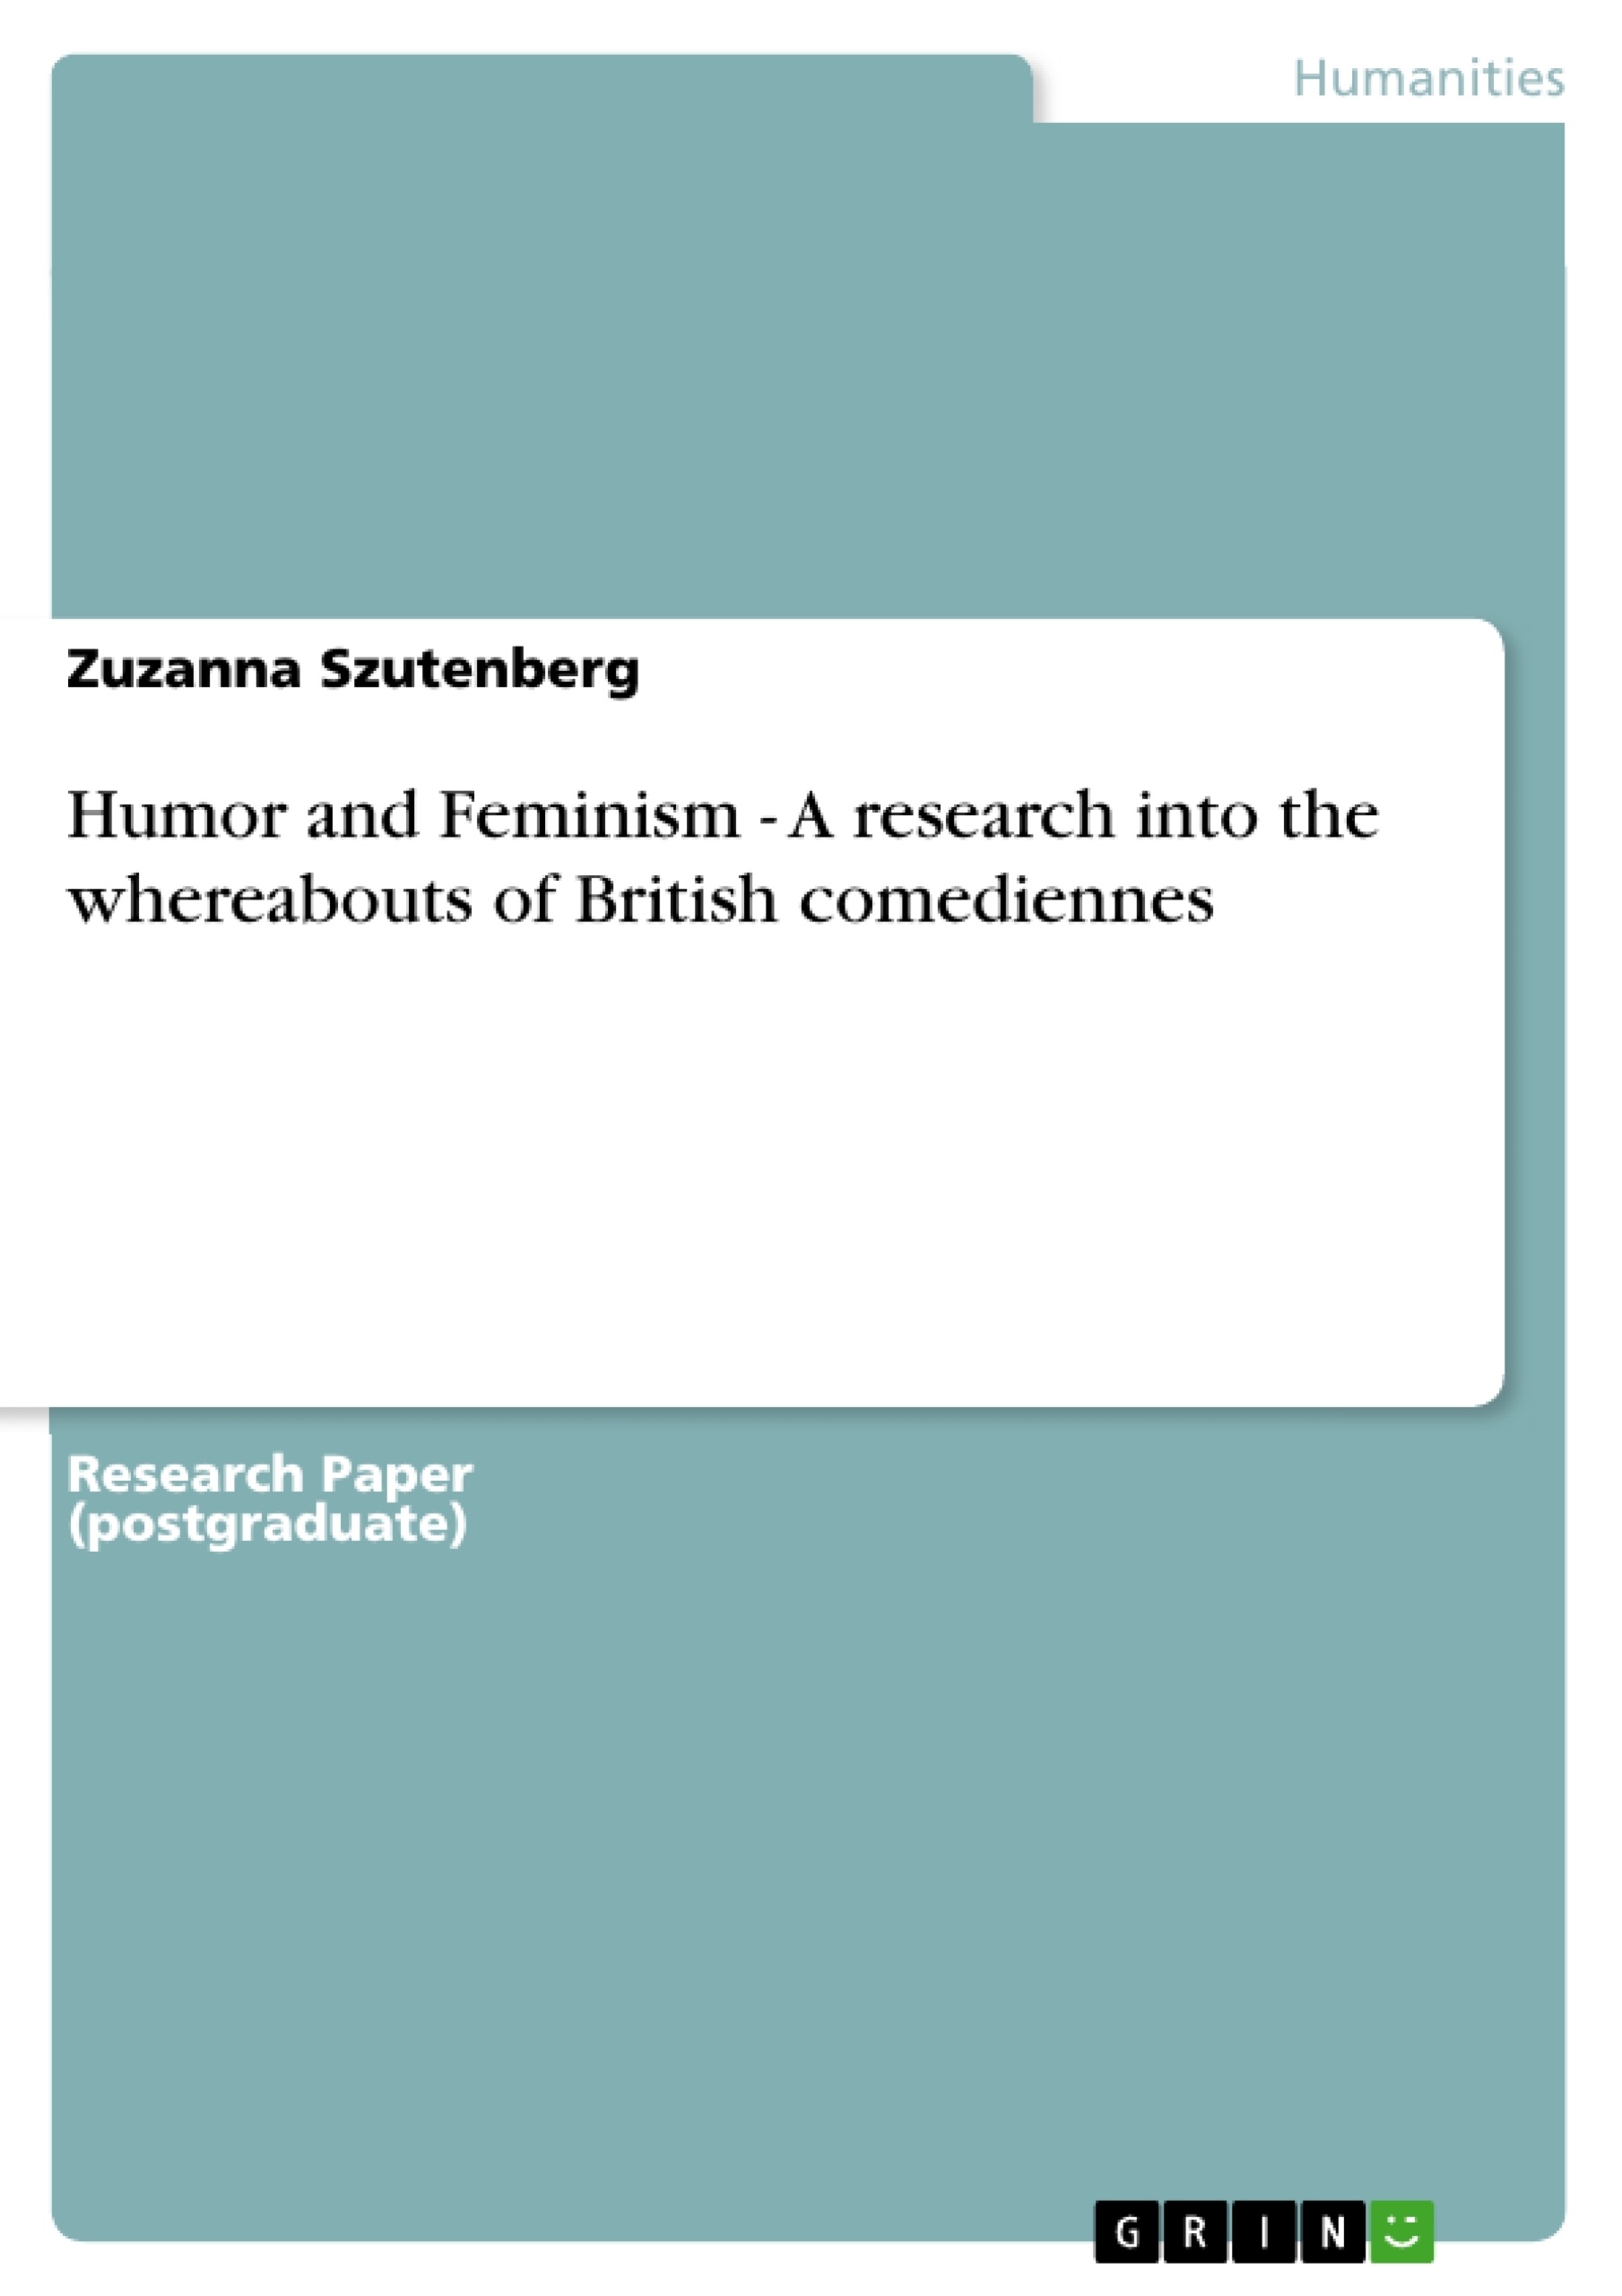 Título: Humor and Feminism - A research into the whereabouts of British comediennes